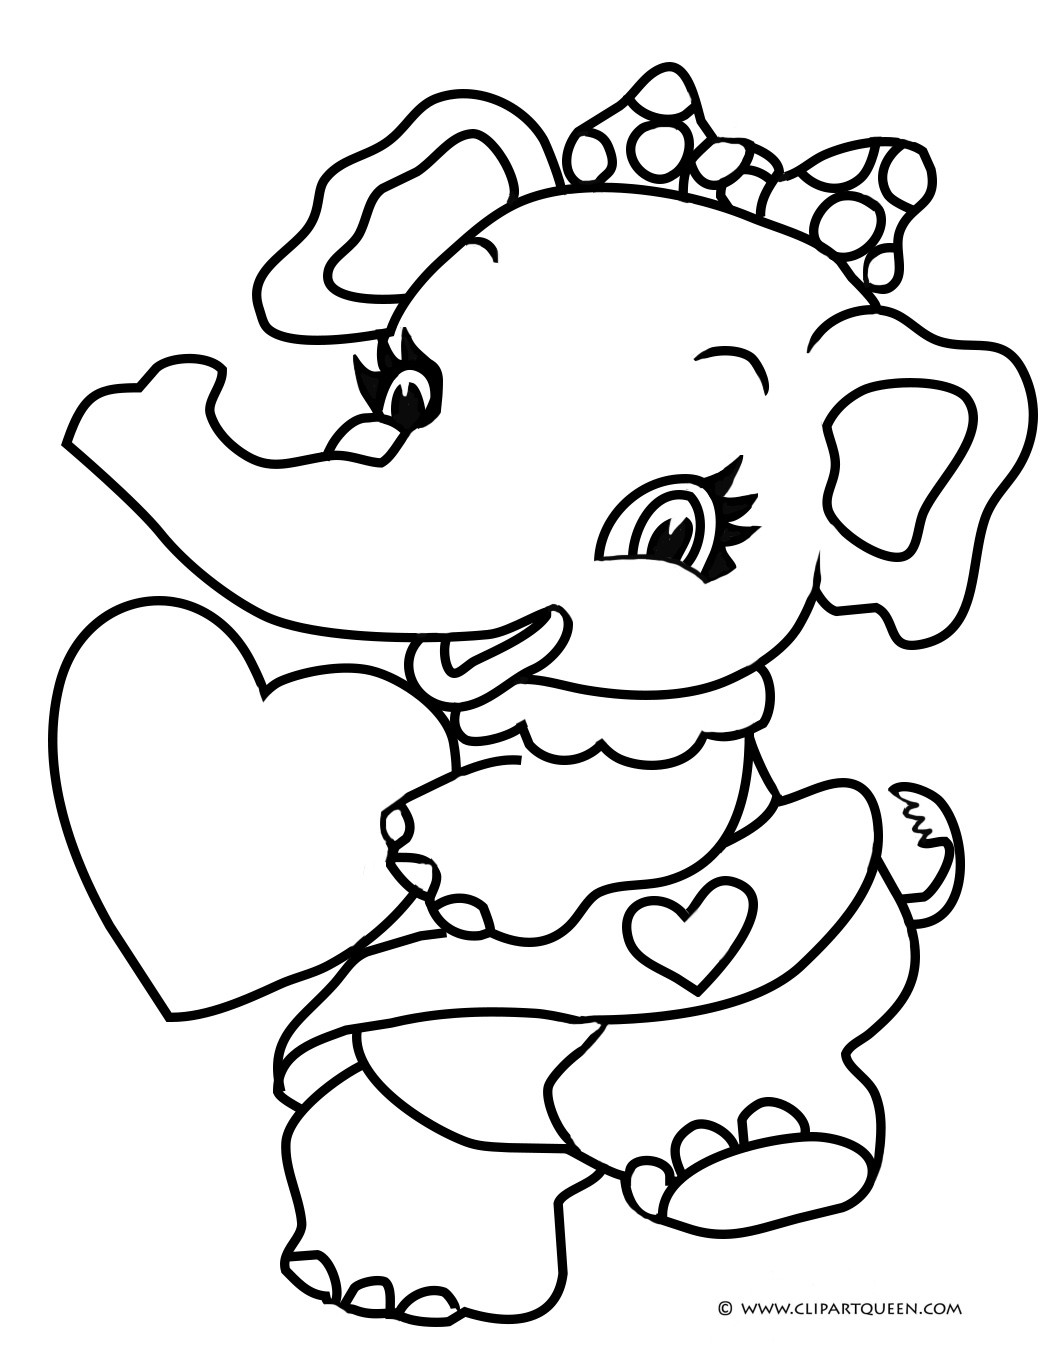 Valentine Day Printable Coloring Pages
 13 Valentine s Day coloring pages